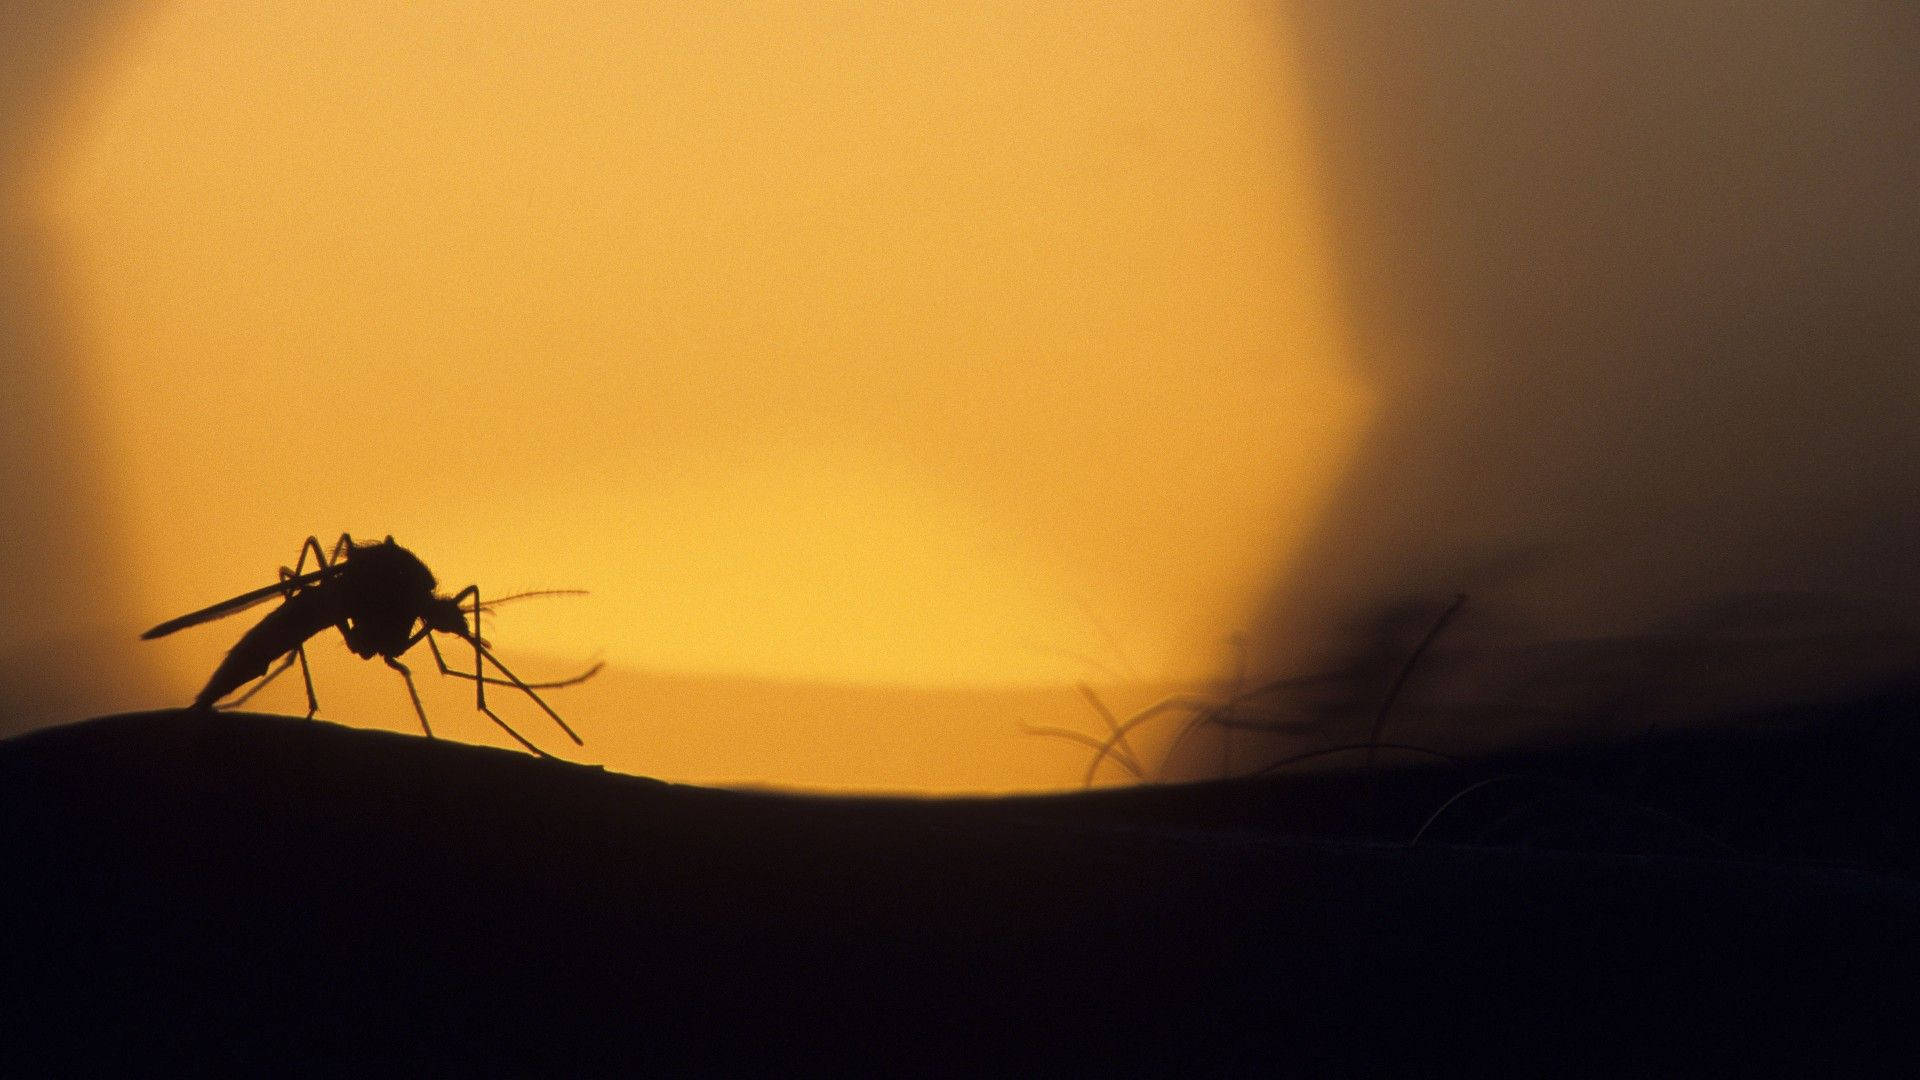 Mosquito's Shadow During Sunset Wallpaper